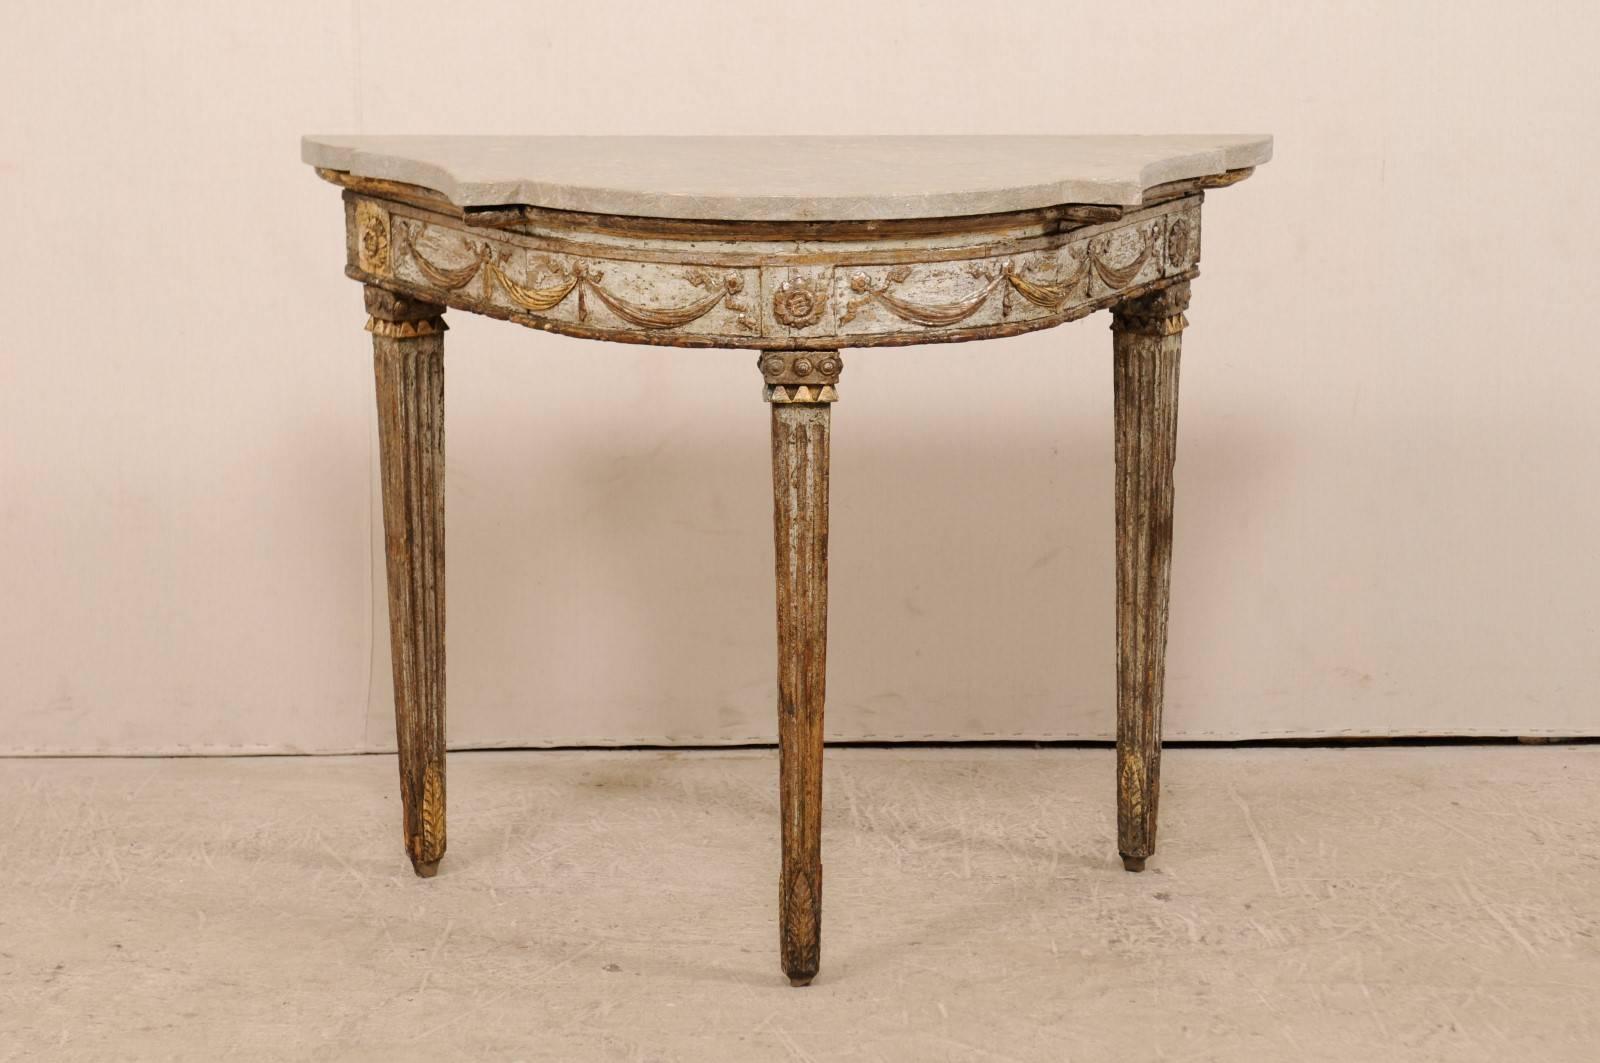 An Italian gilt demilune console table from the 18th century with fossilized granite top. This fabulous antique Italian carved wood demilune table retains it's original gold and silver gilt finish and has a nicely shaped fossilized and honed granite